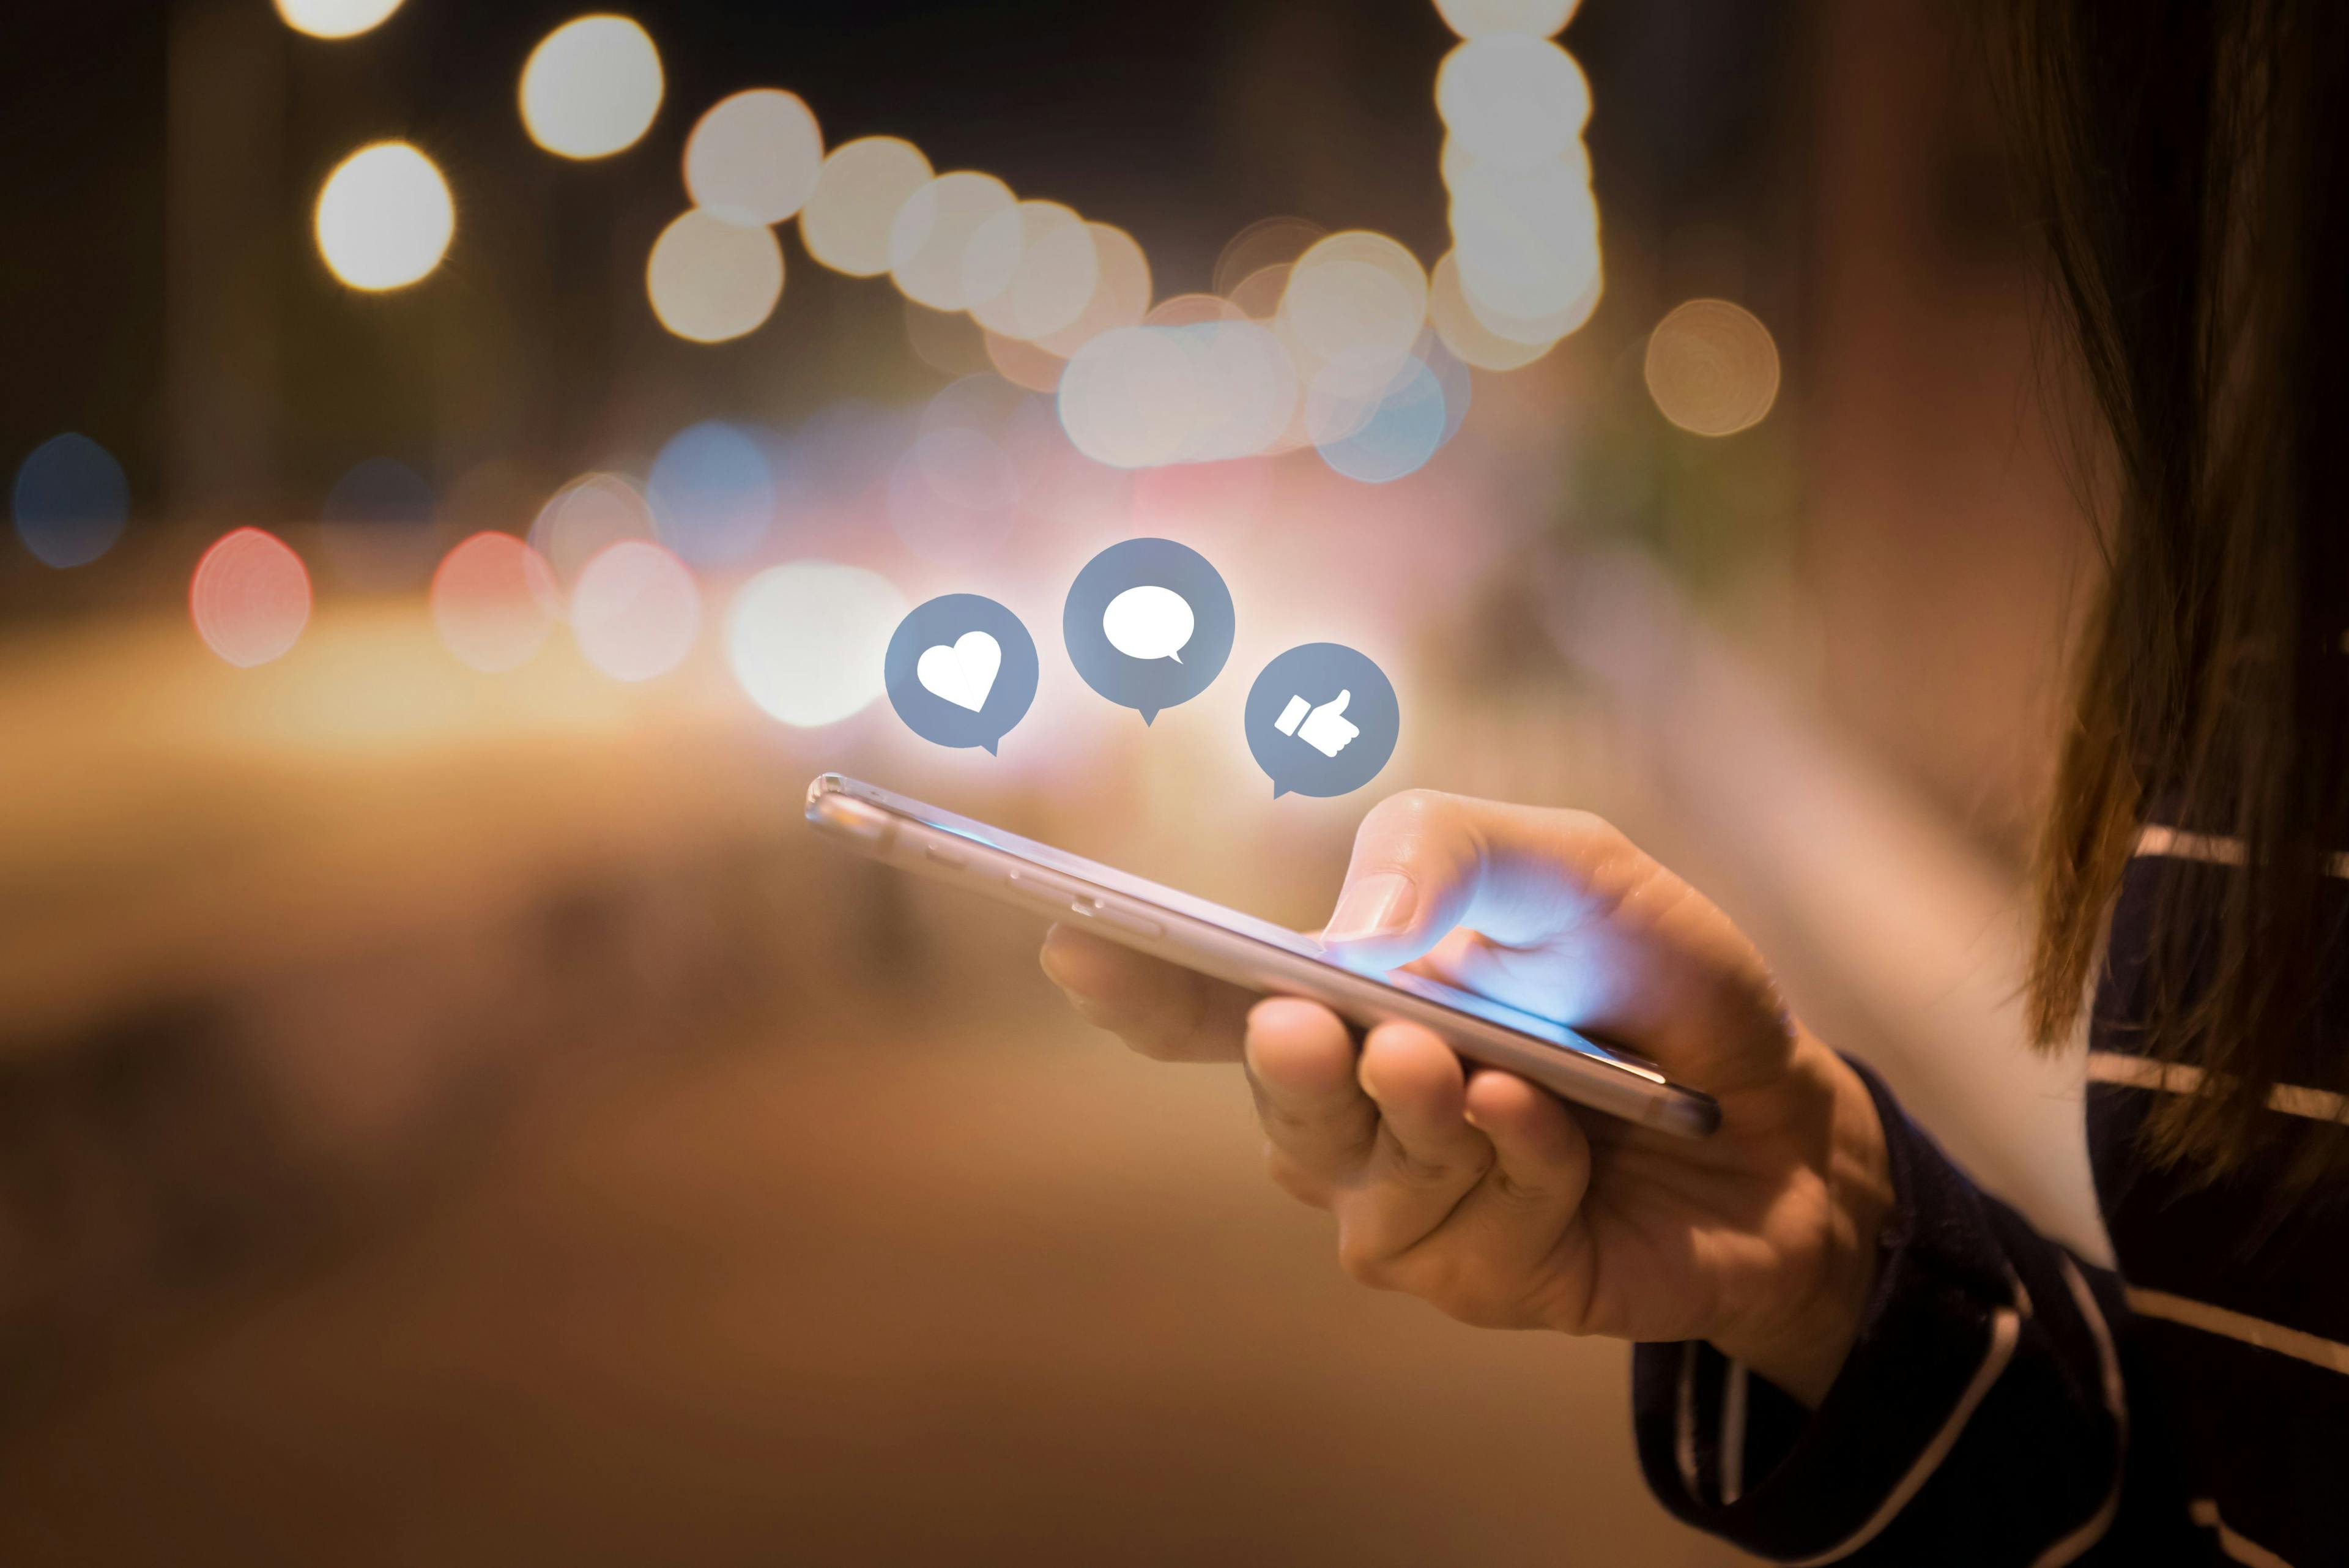 Social media is an invaluable tool for enhancing professional and personal growth for ophthalmologists, particularly for women, trainees, and younger surgeons through education and community-building. (Image courtesy of Adobe Stock)